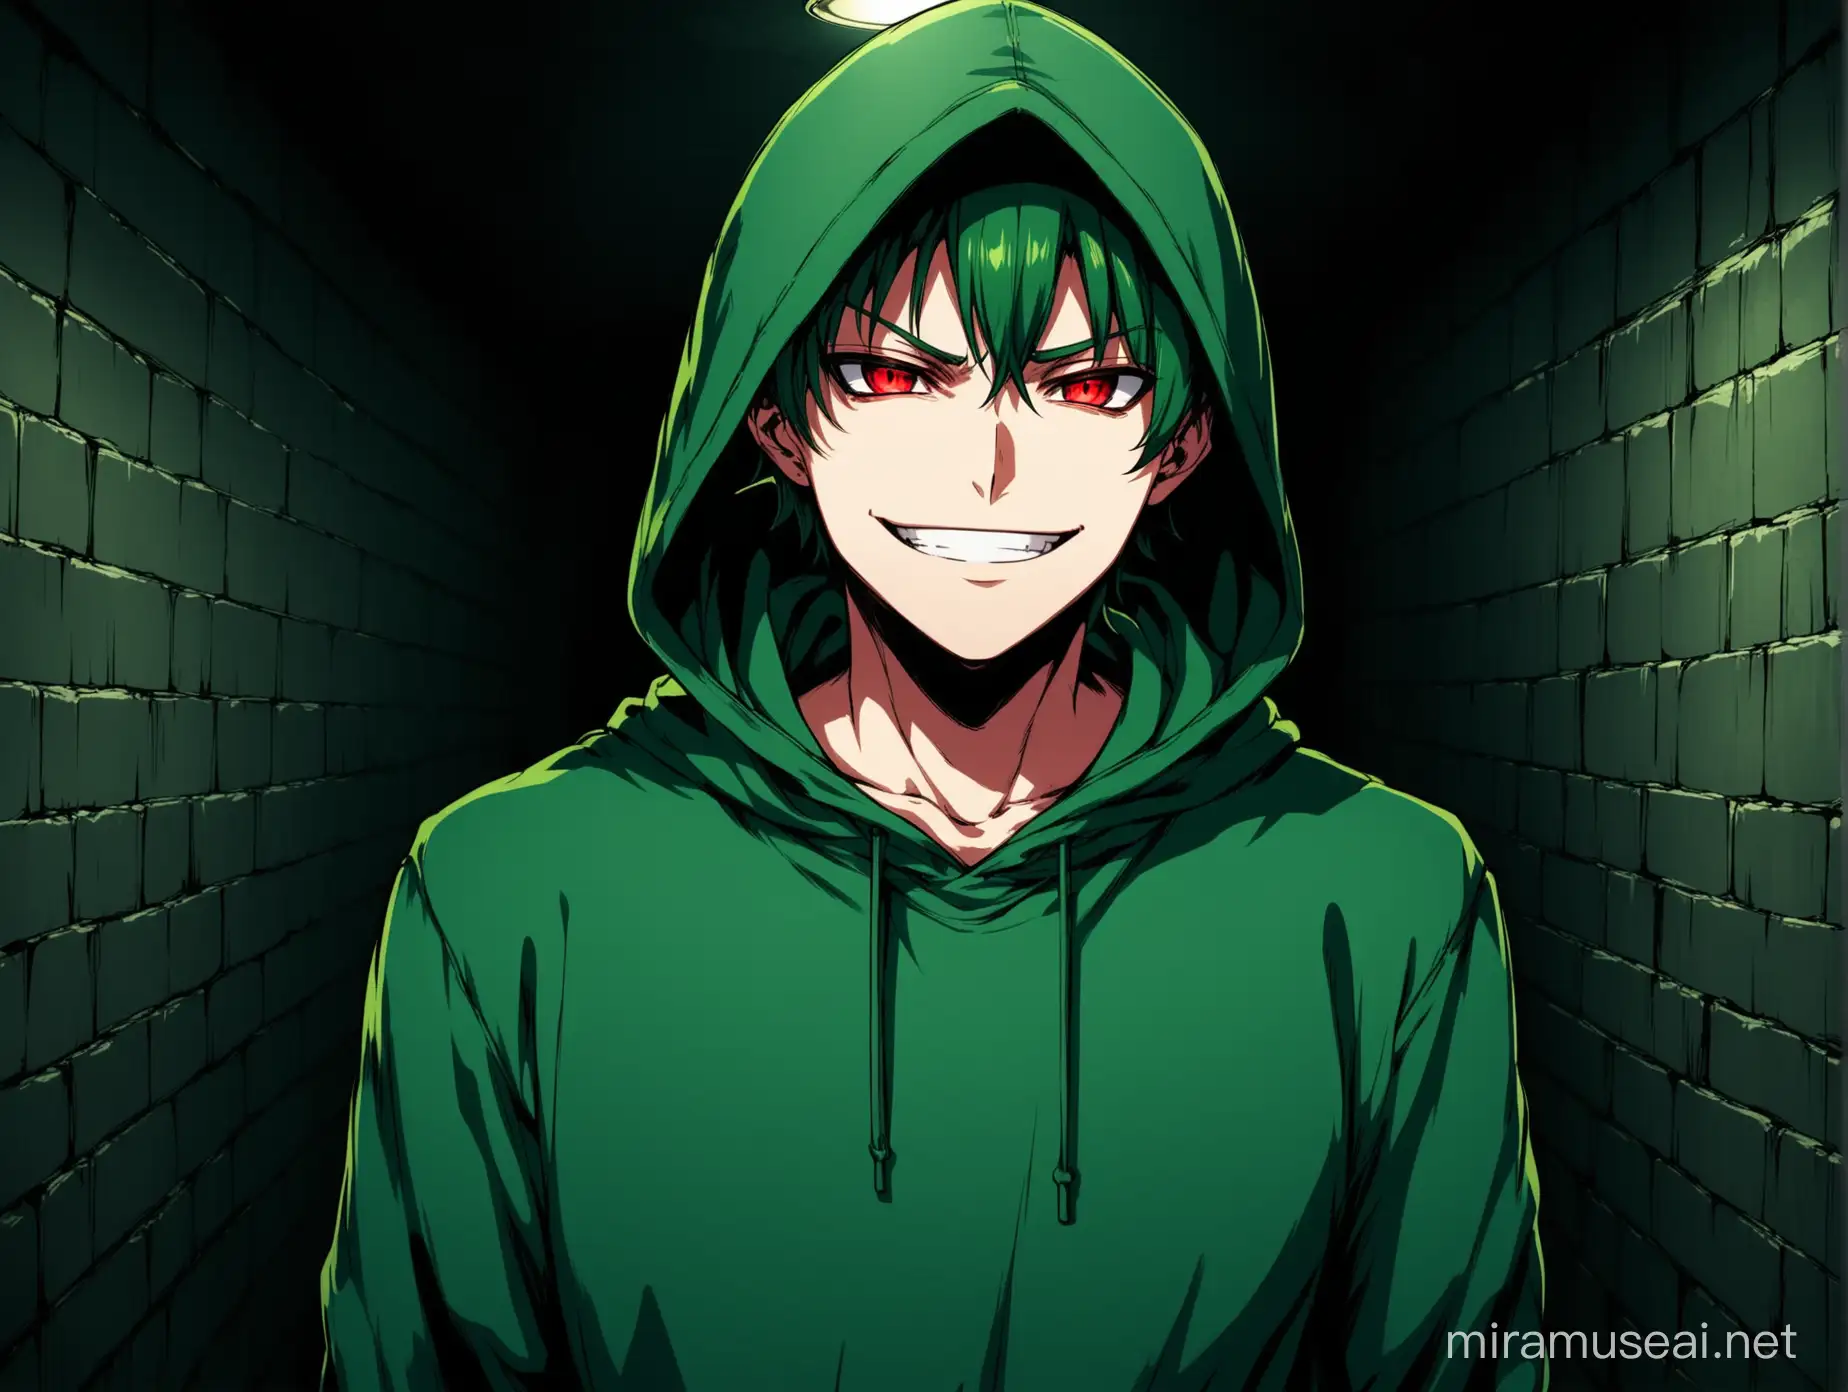 An anime male criminal, evil character who is dark green headed, evil, criminal, wearing dark green hoodie, bright red eyes, dreadful smile, wearing hoodie cap smiling in an underground secret room with dark green contrasts and vibe in anime style 